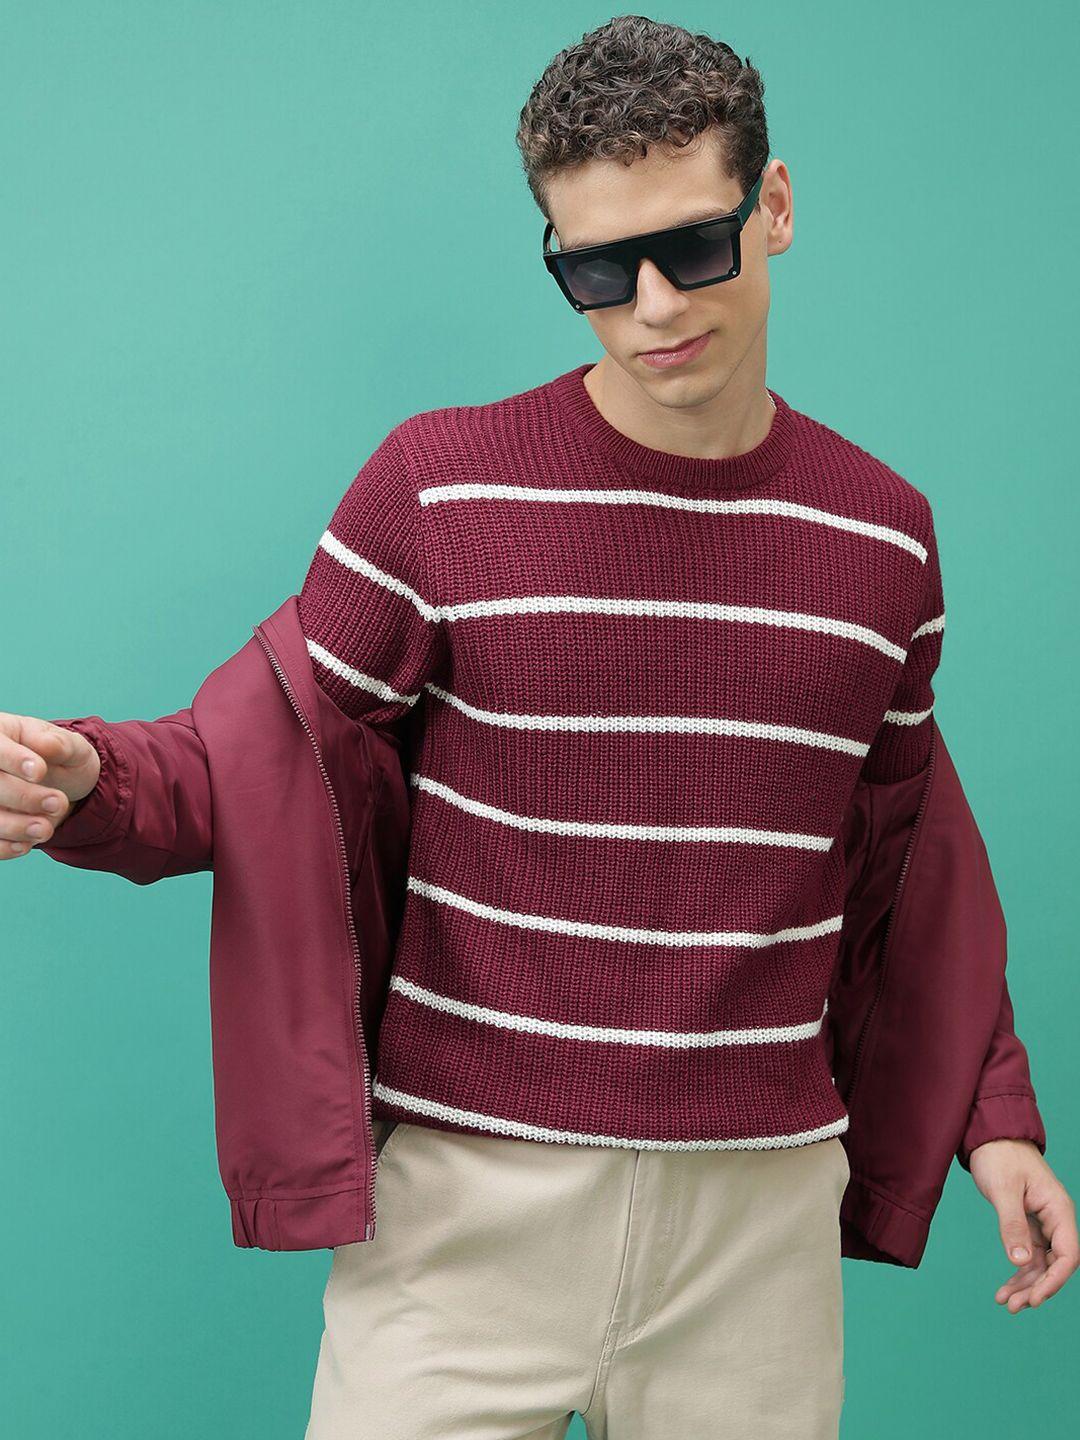 highlander striped acrylic pullover sweater